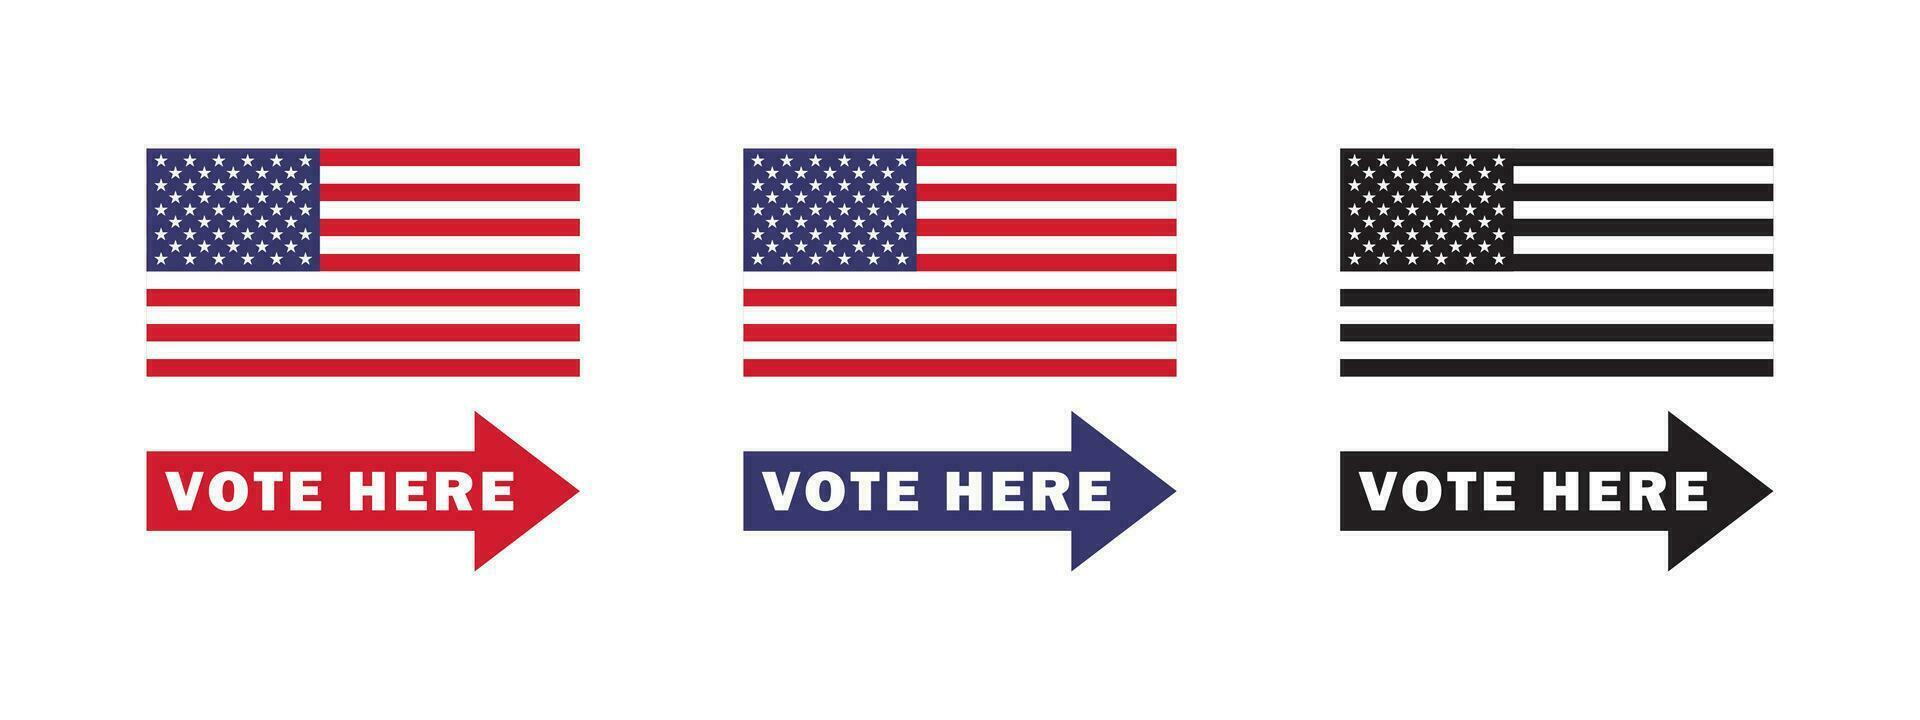 Vote here signs. Election and voting USA. Voting in election. Vector scalable graphics